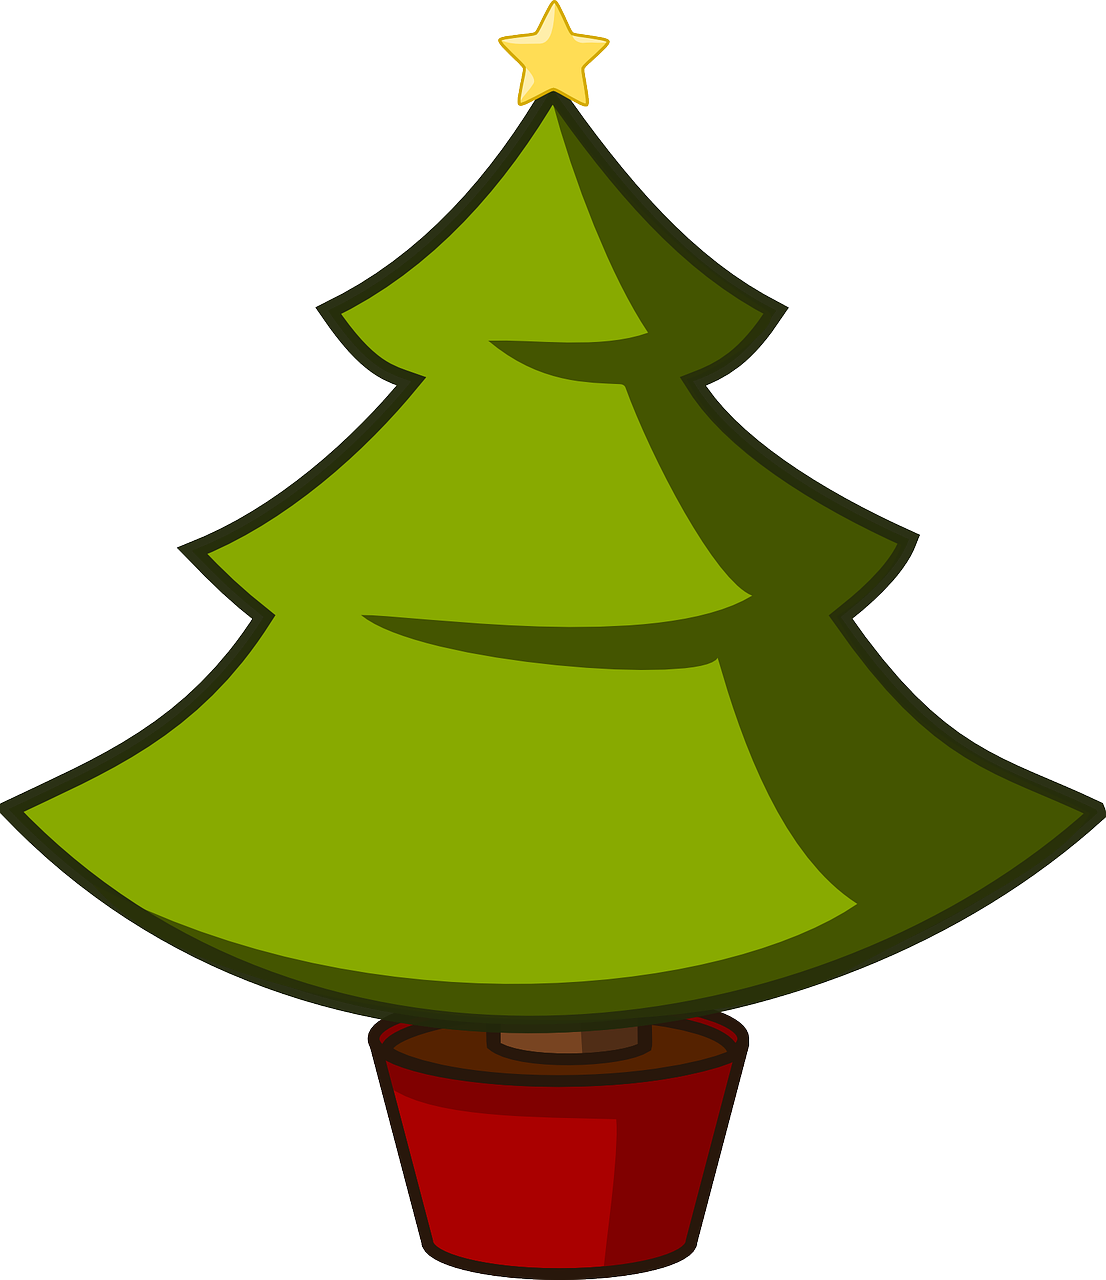 Illustration of Christmas tree with star on top